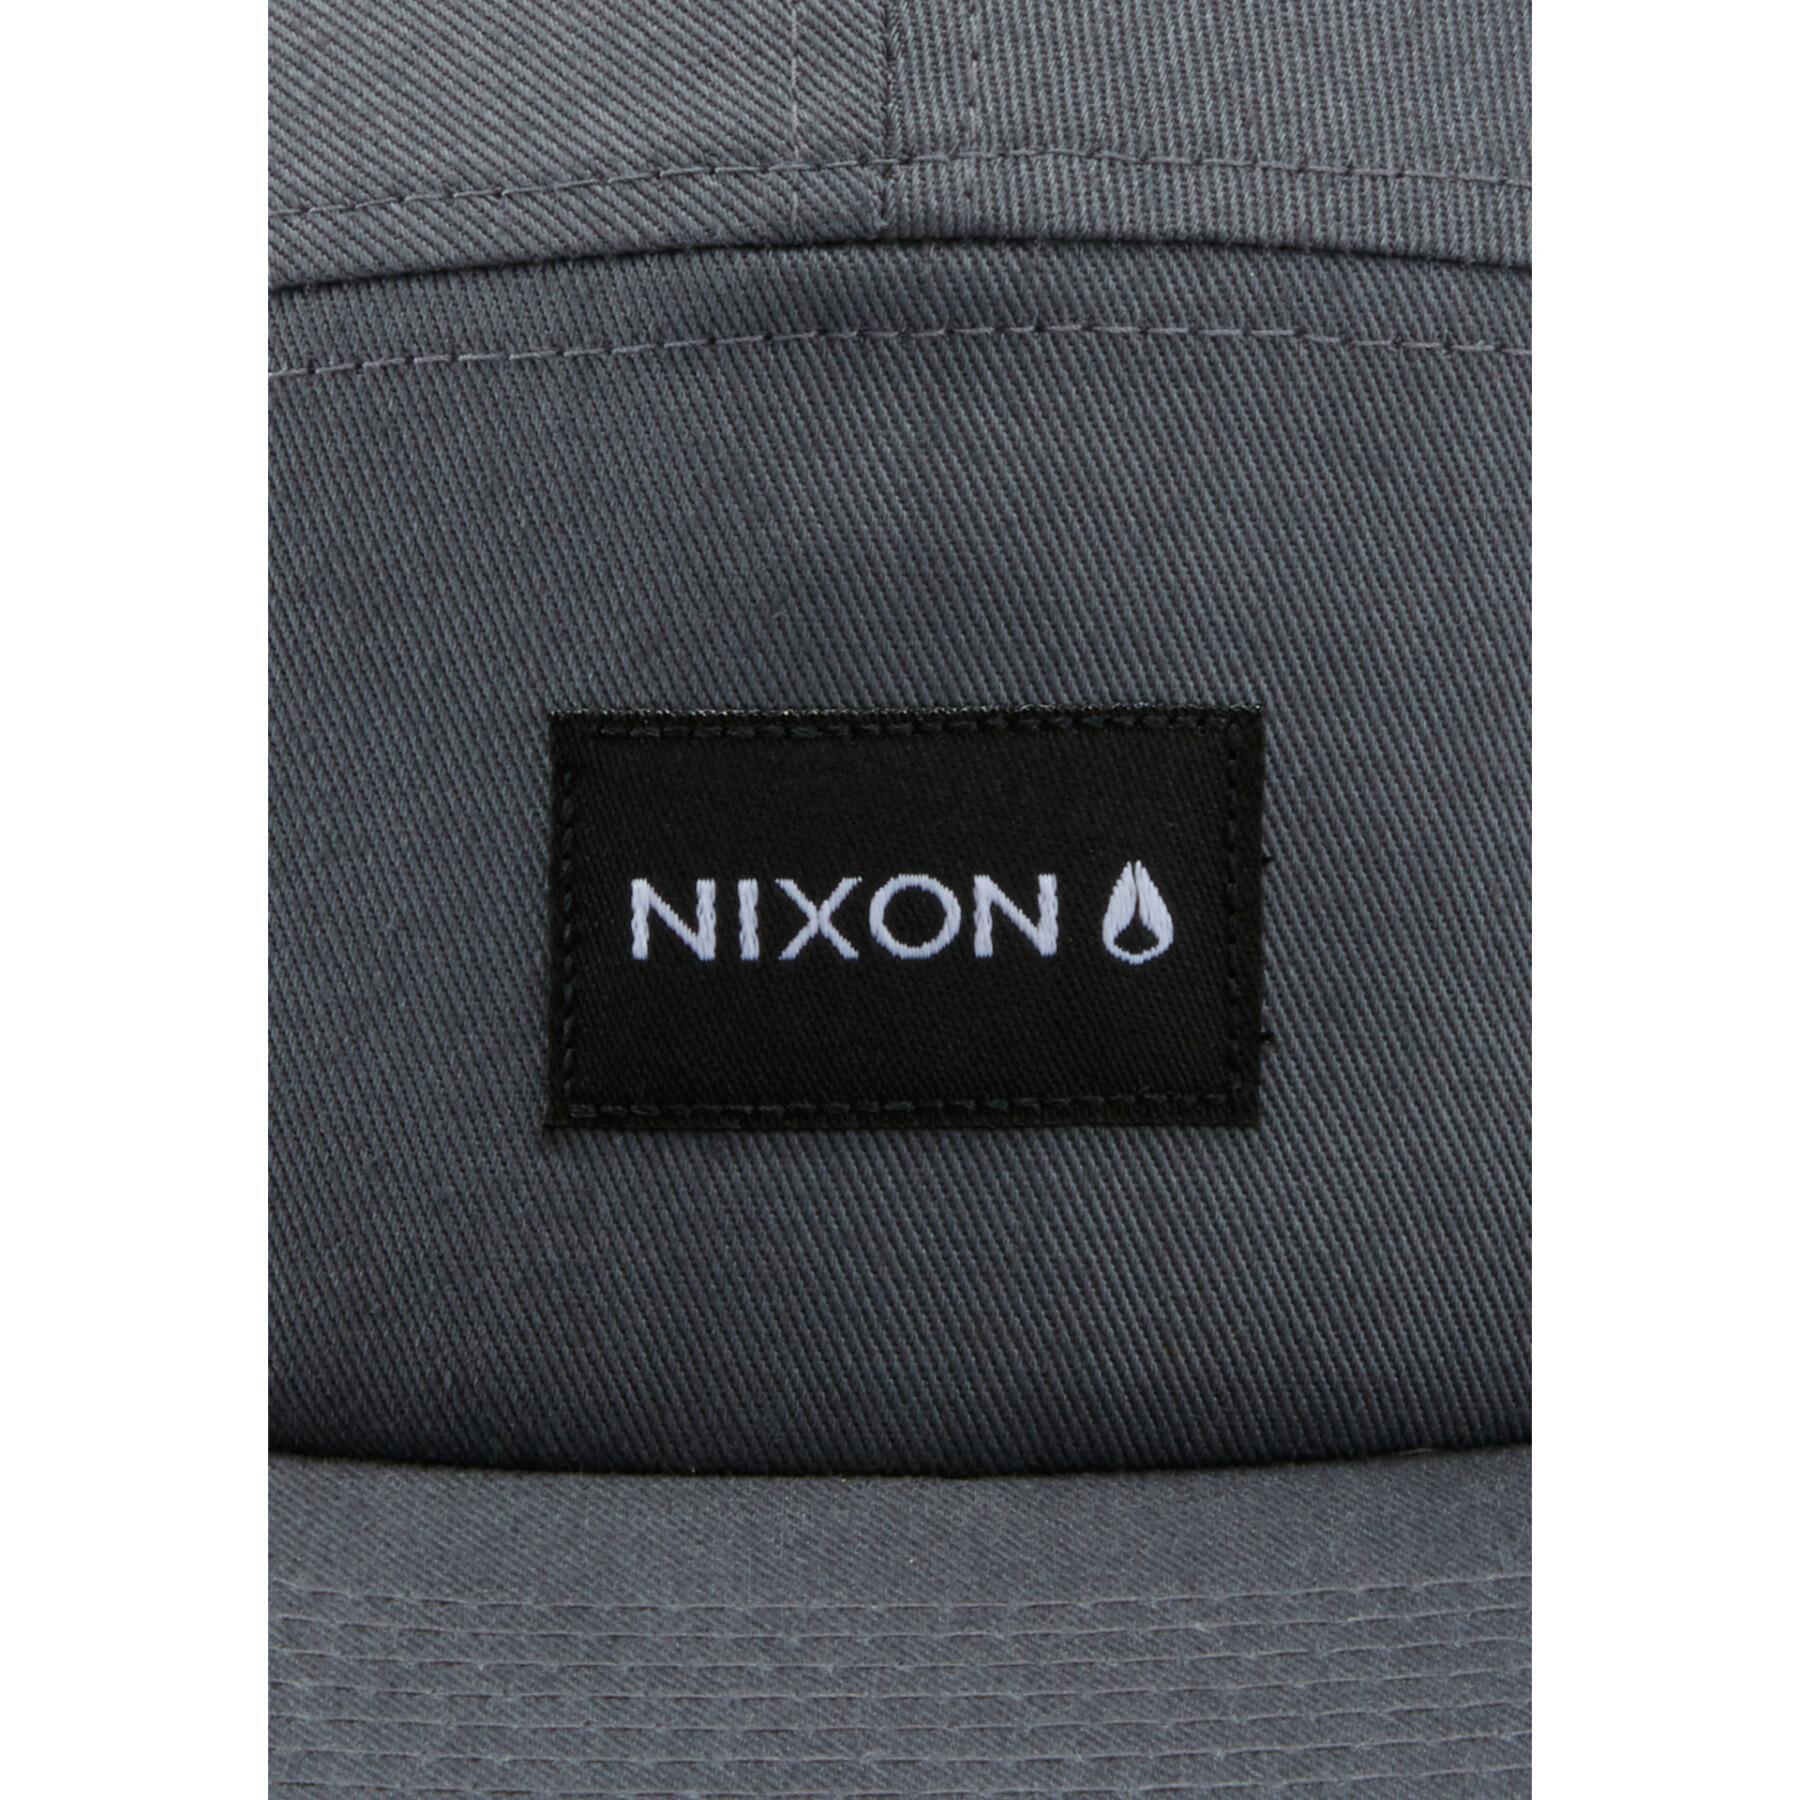 Cap with back strap Nixon Mikey